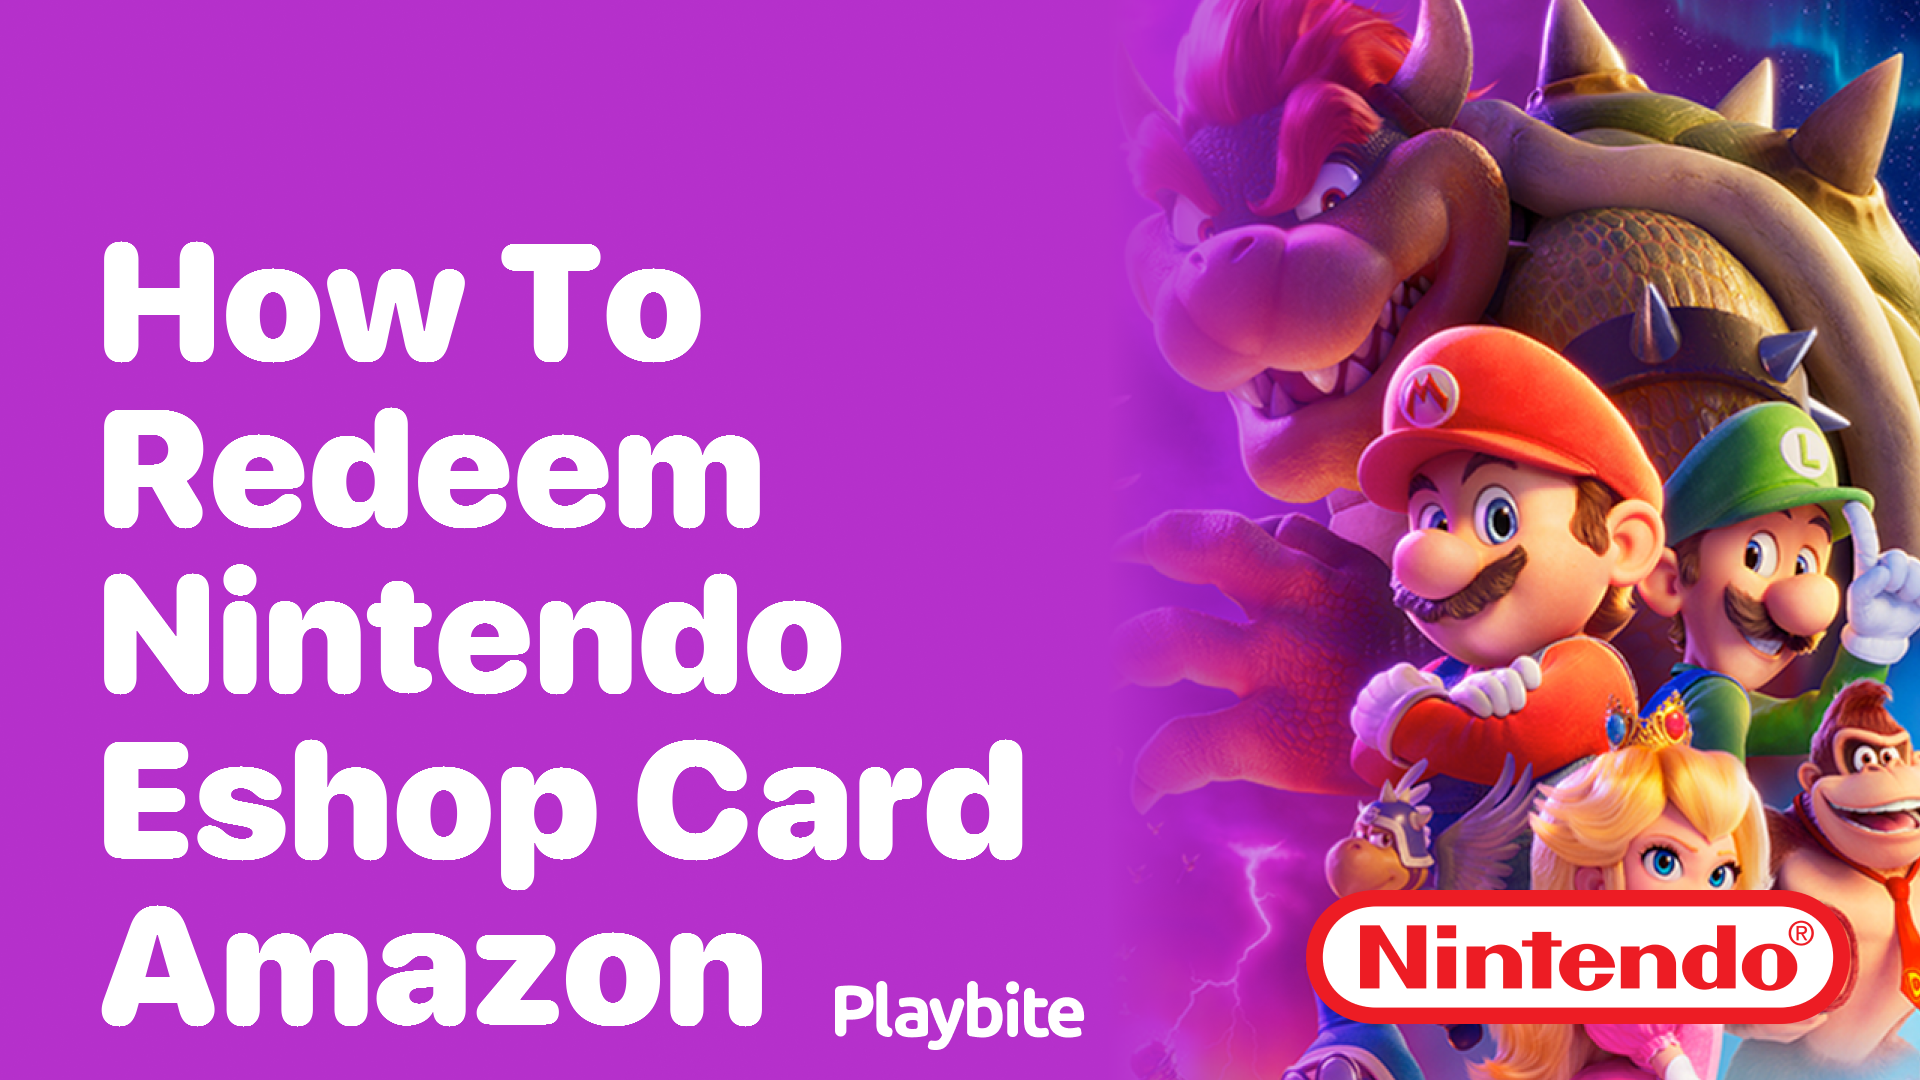 How to Redeem a Nintendo eShop Card from Amazon